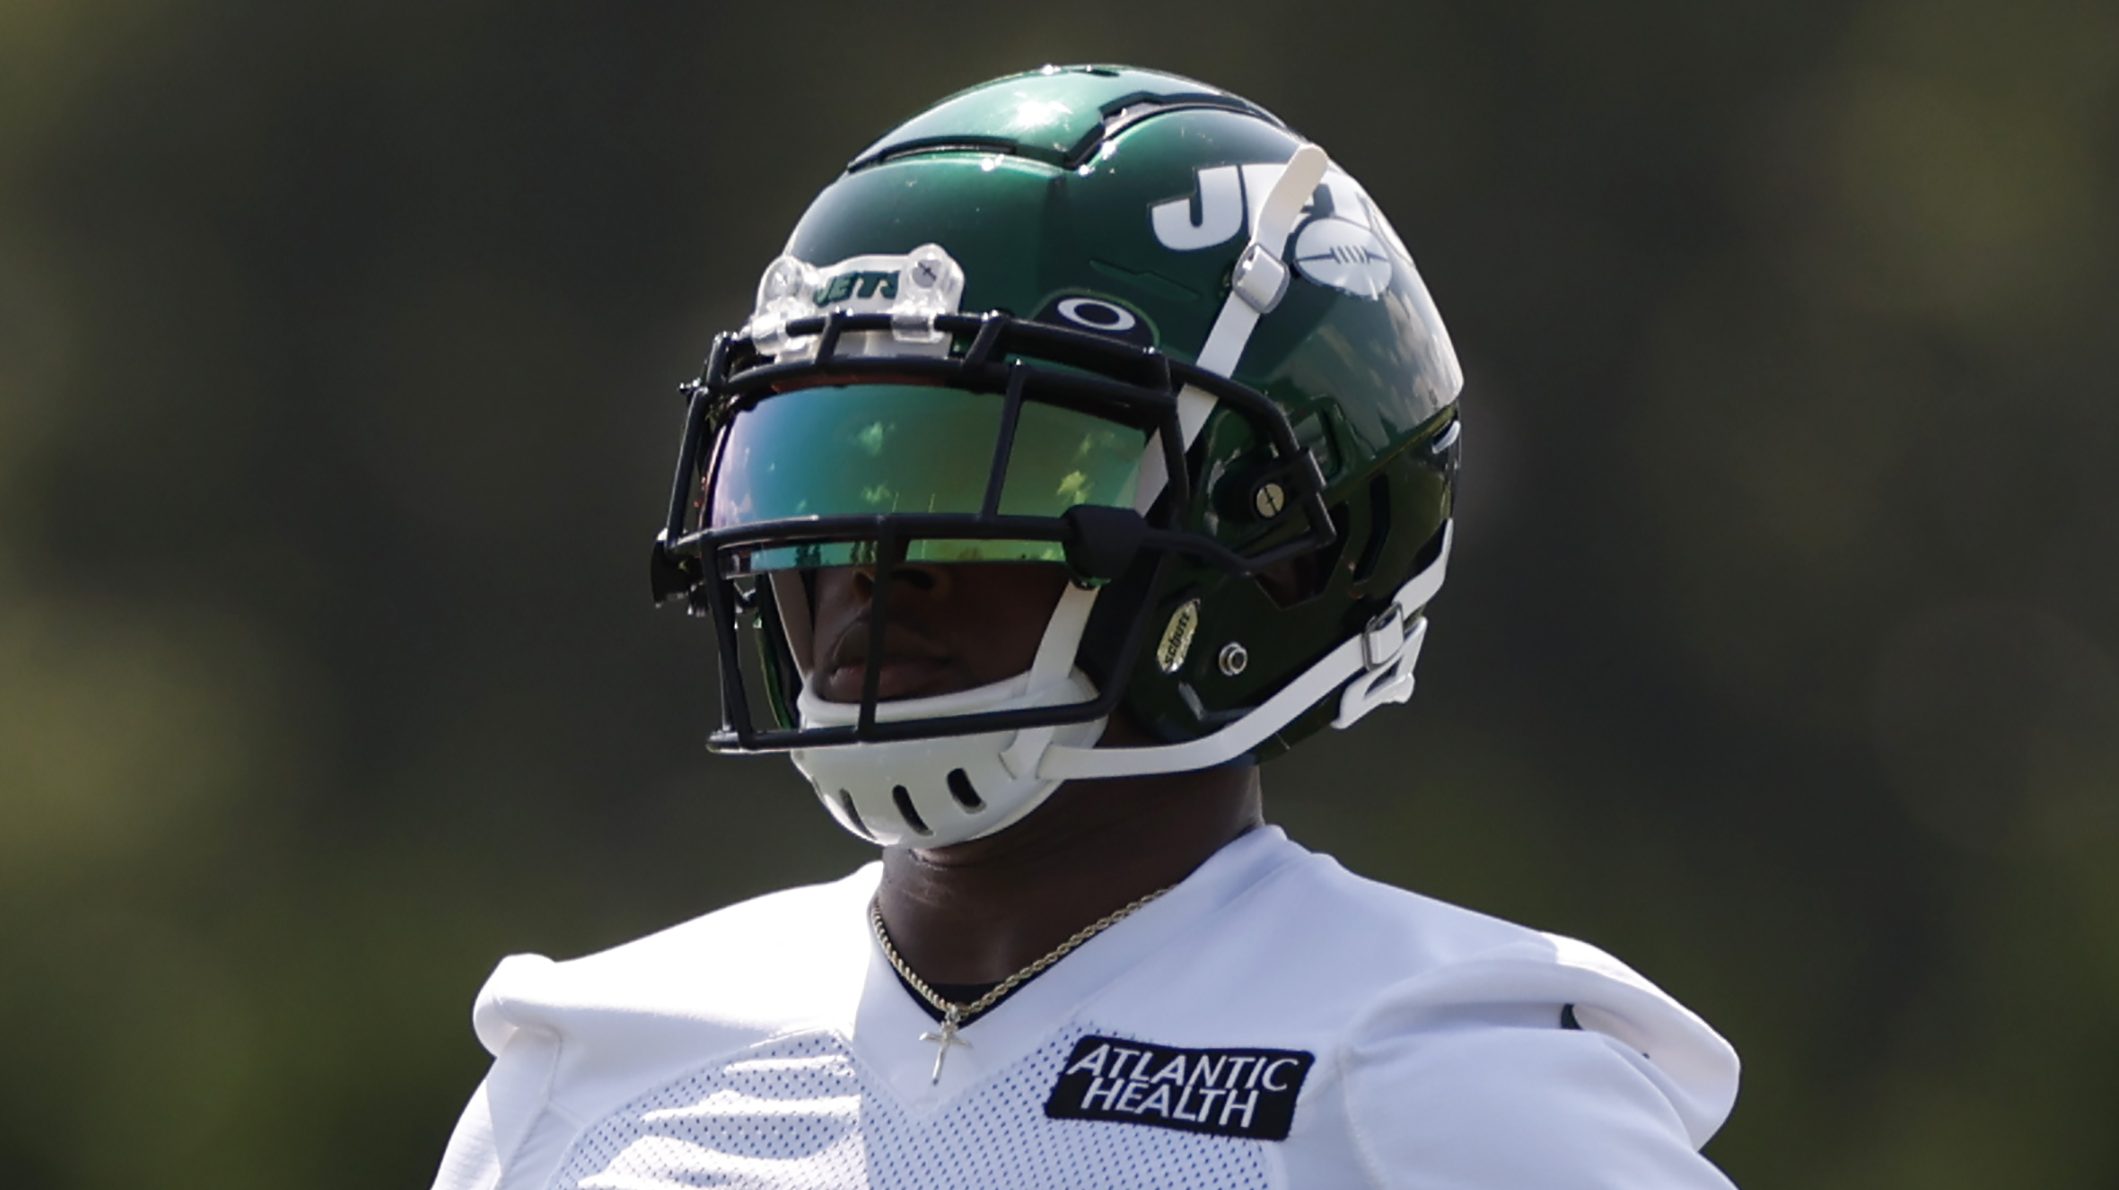 Jets RB Breece Hall signs rookie contract ahead of training camp